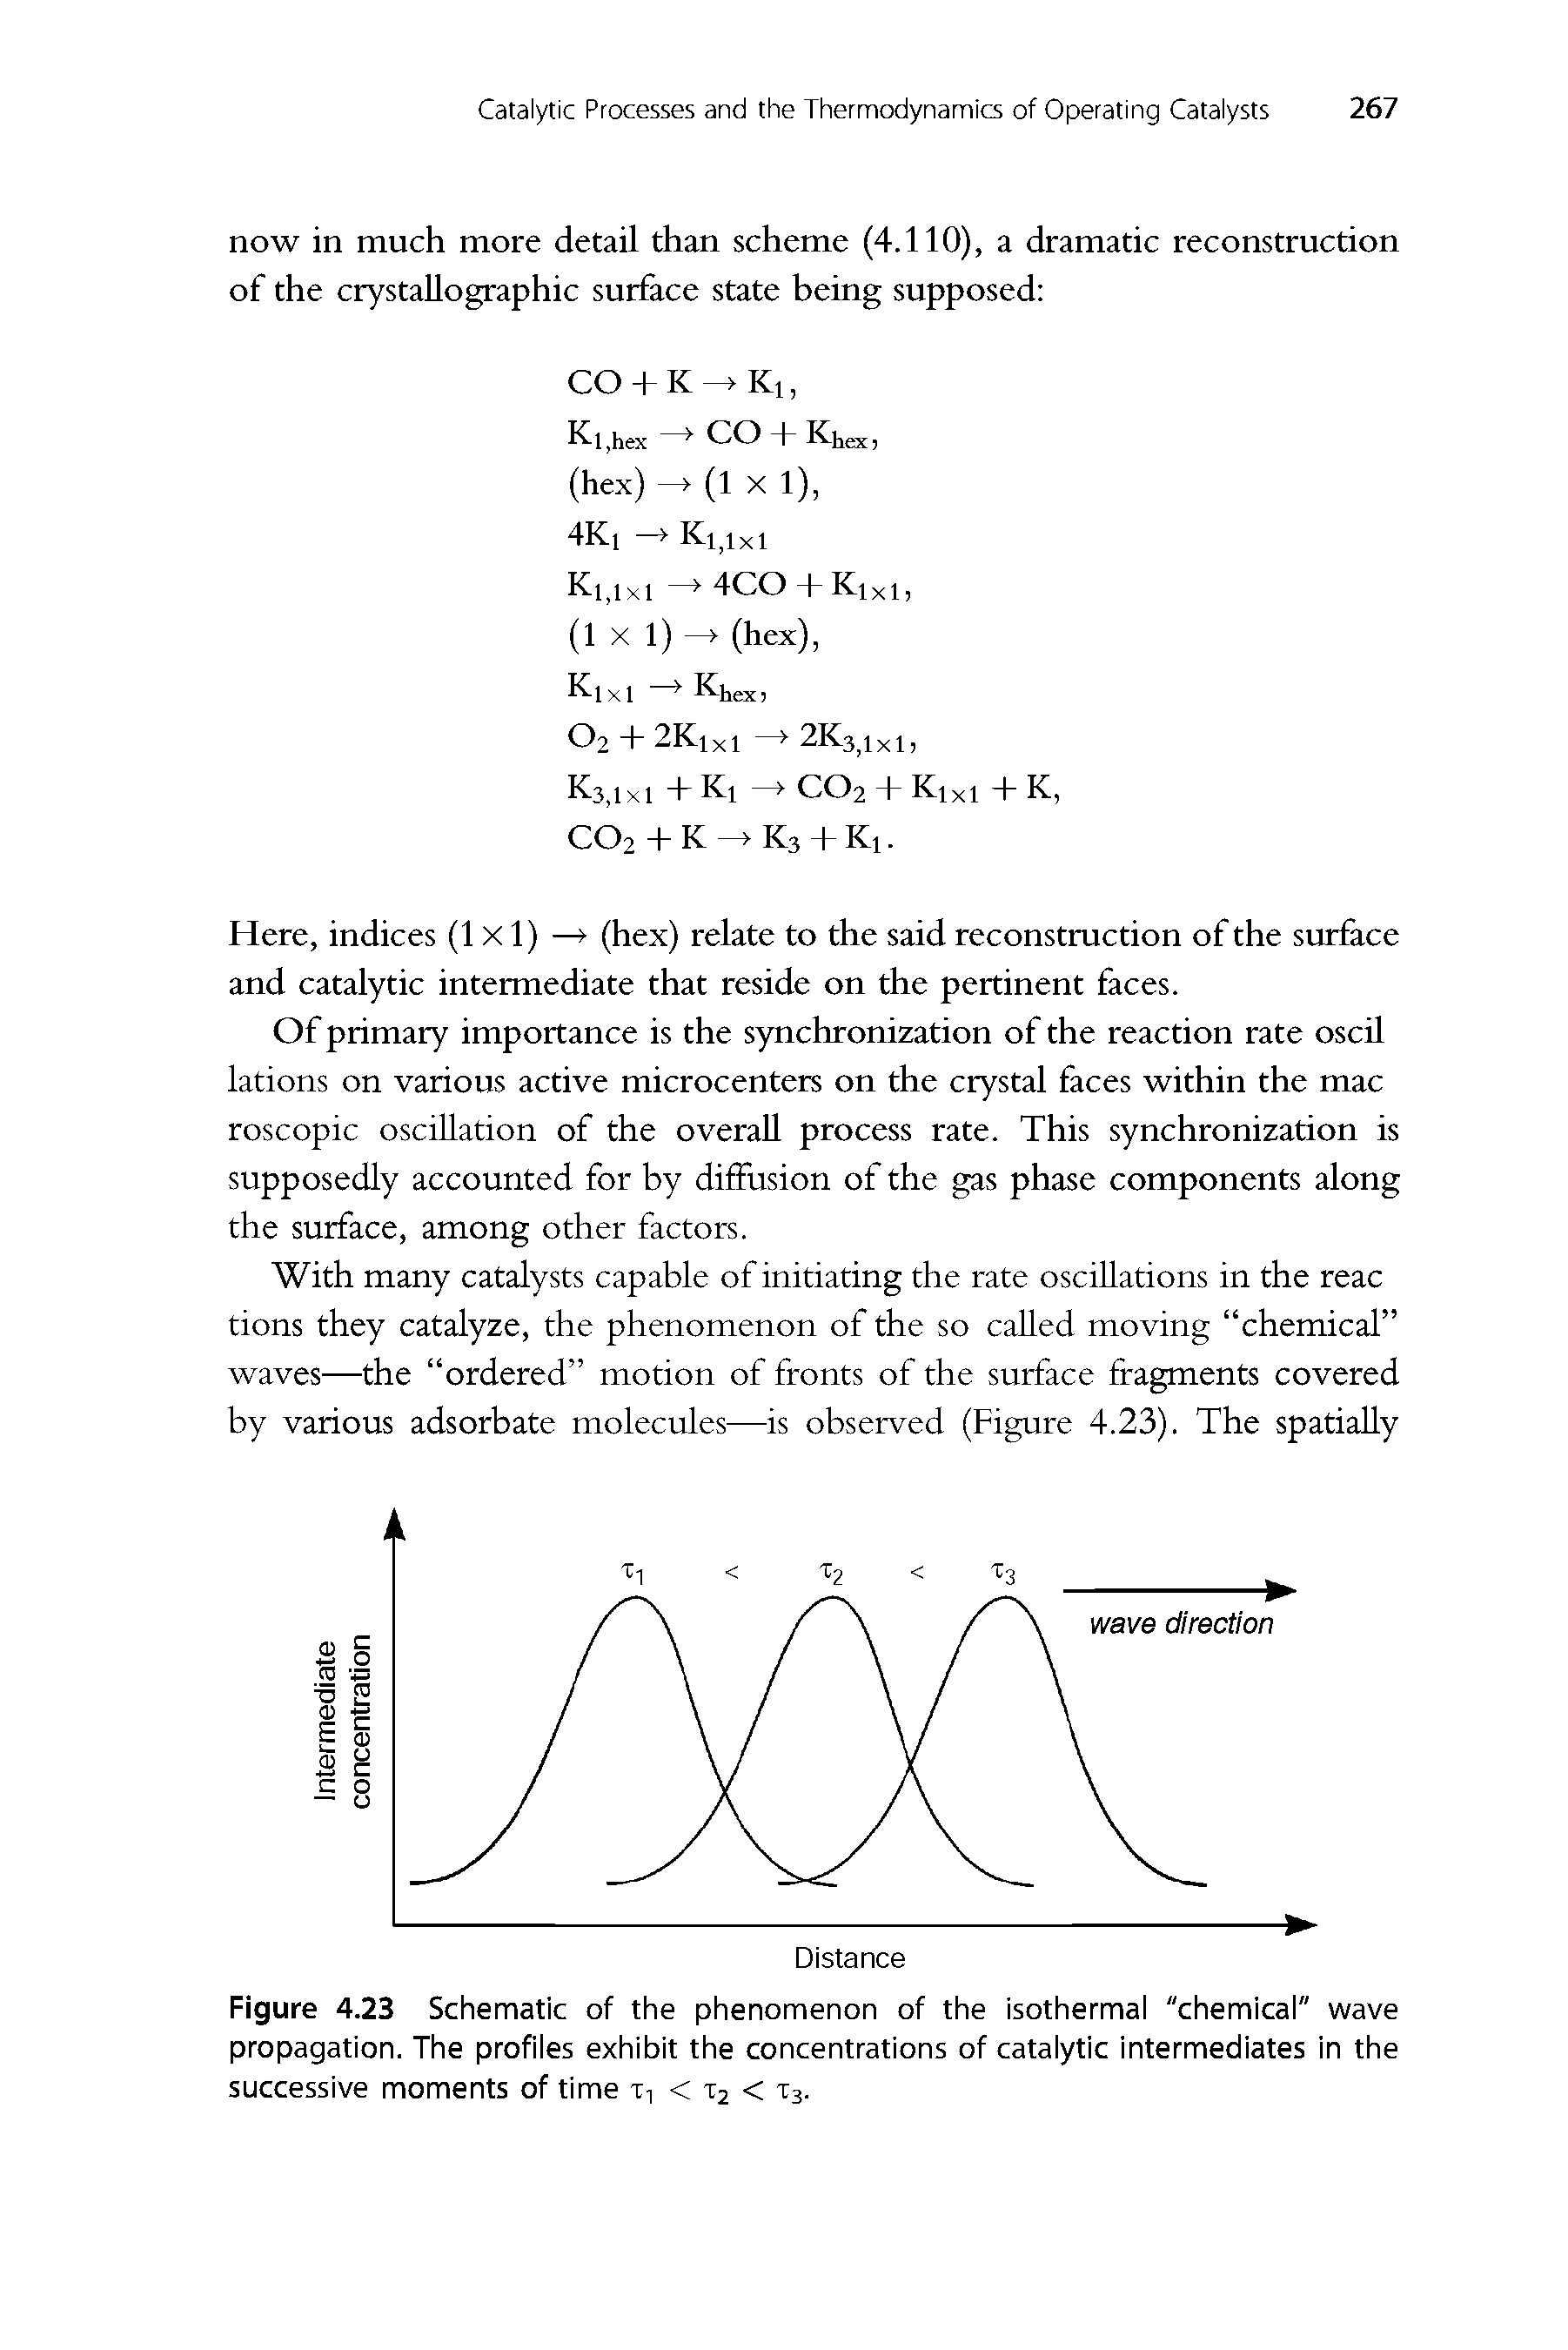 Figure 4.23 Schematic of the phenomenon of the isothermal "chemical" wave propagation. The profiles exhibit the concentrations of catalytic intermediates in the successive moments of time tt < T2 < T3.